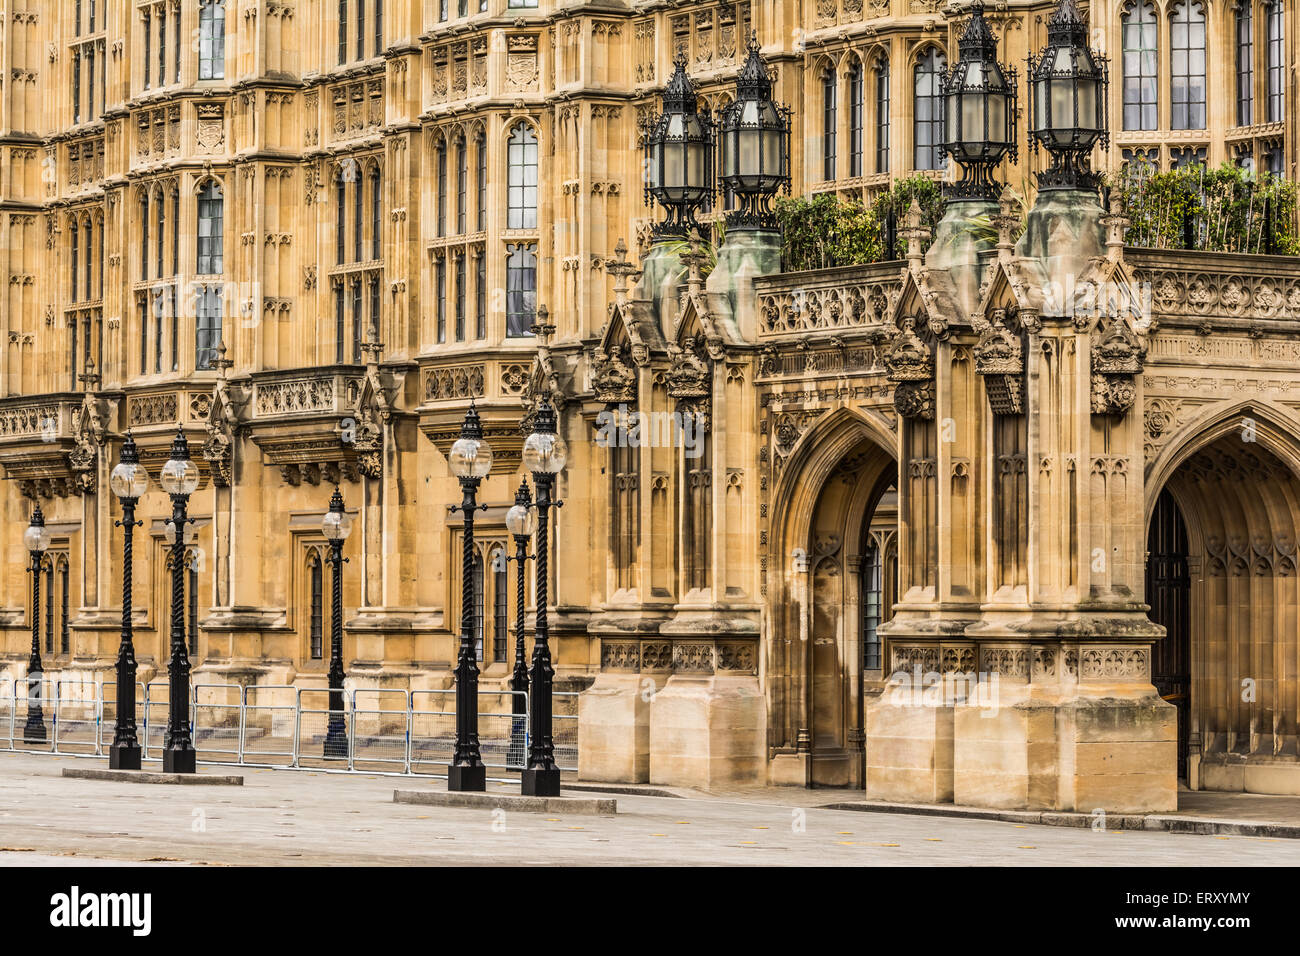 Architectural detail of the Palace of Westminster, London,UK. Stock Photo